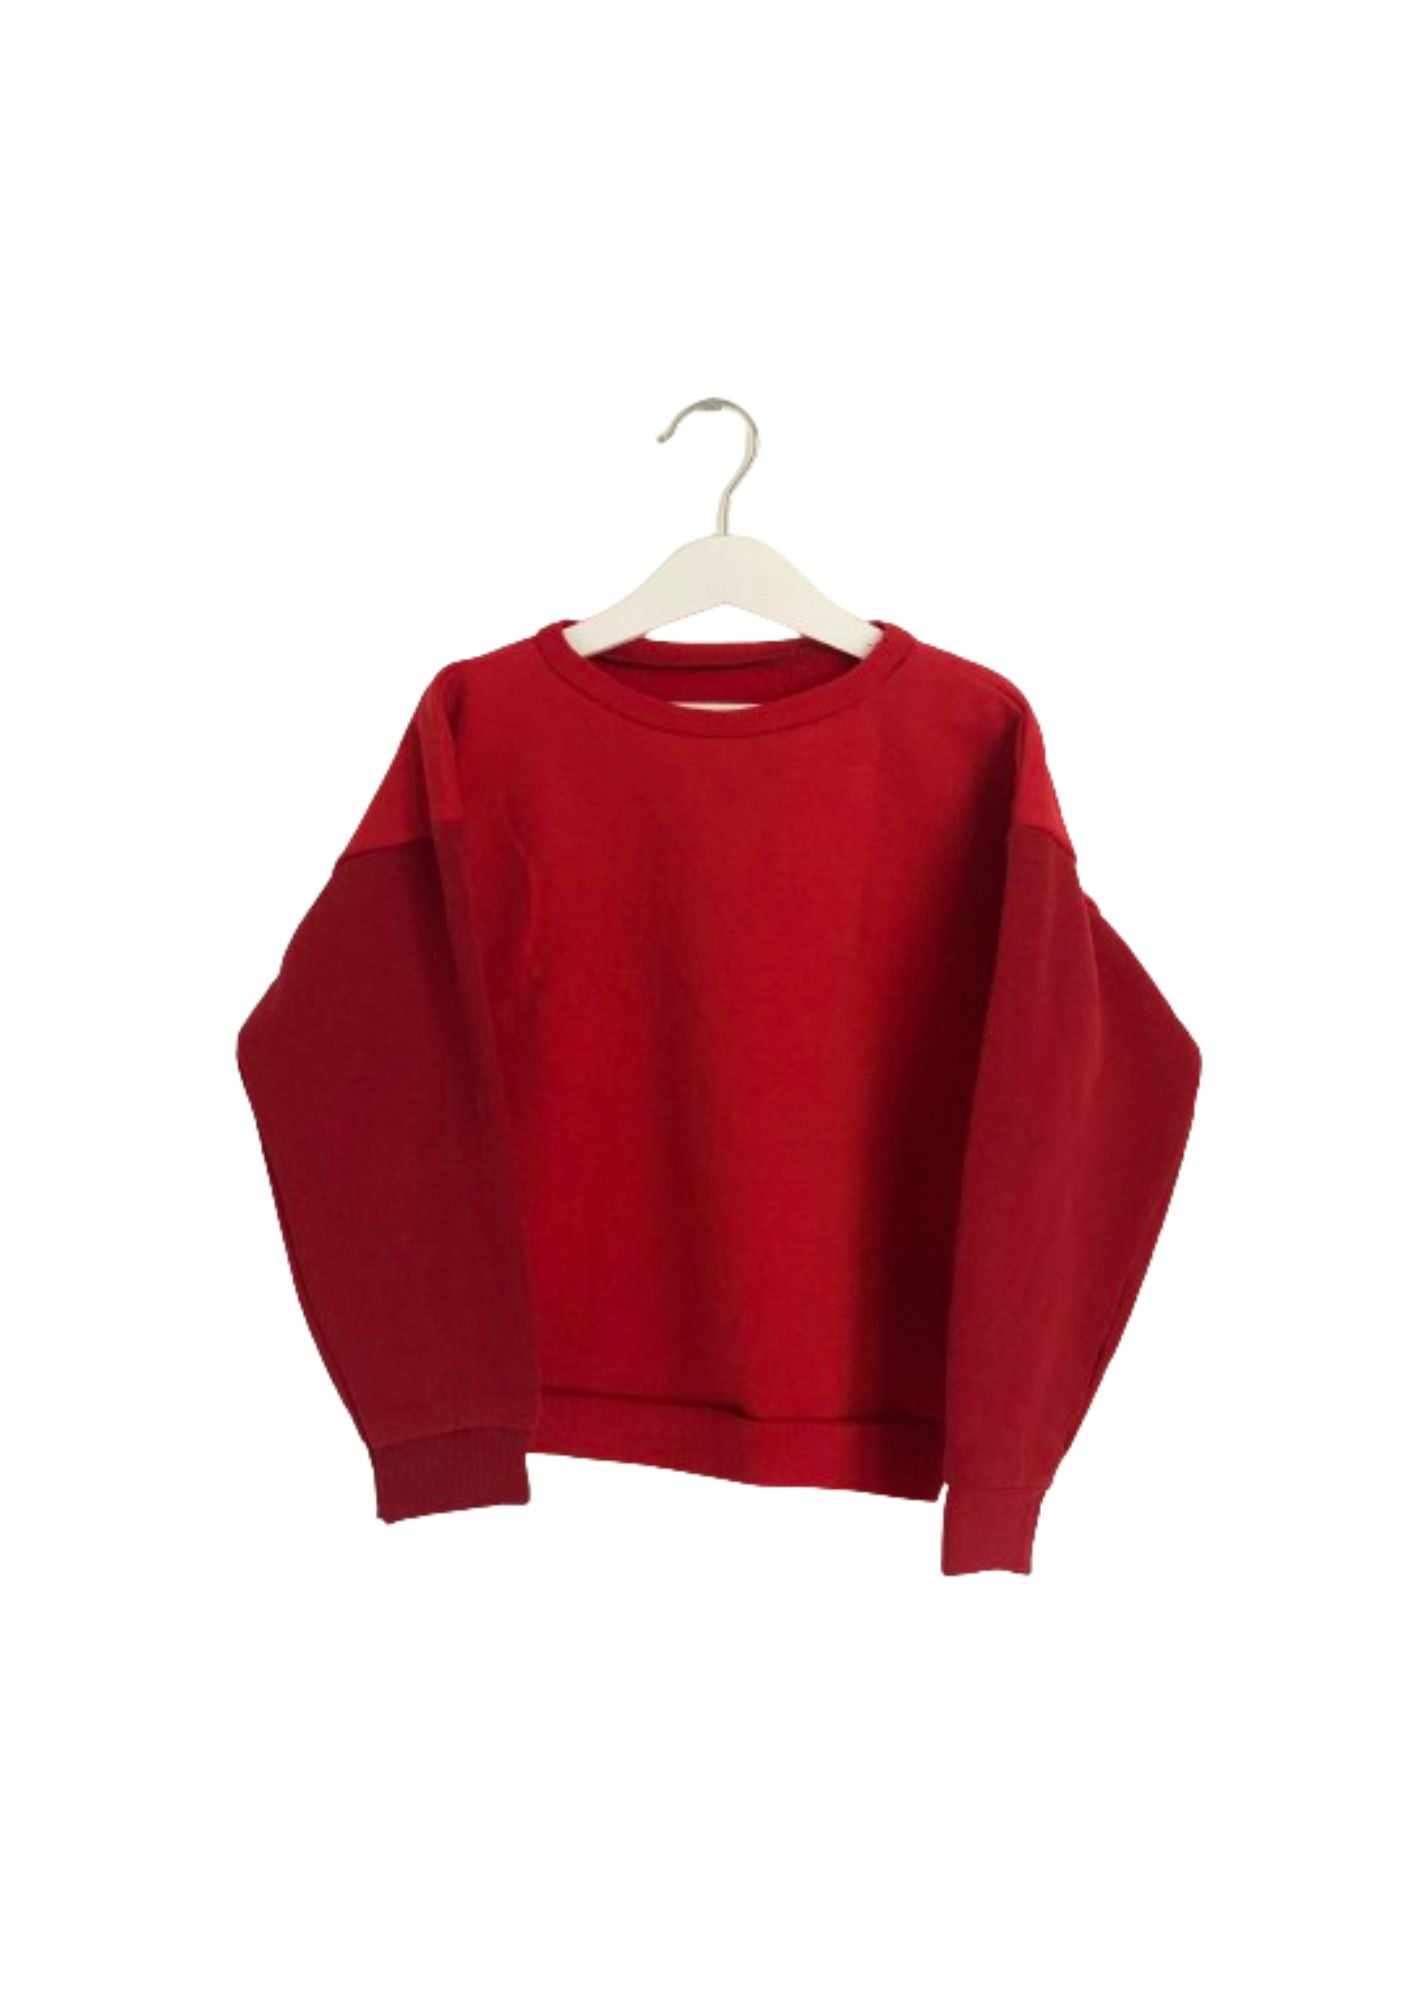 SWEAT JERRY 6 ANS ROUGE